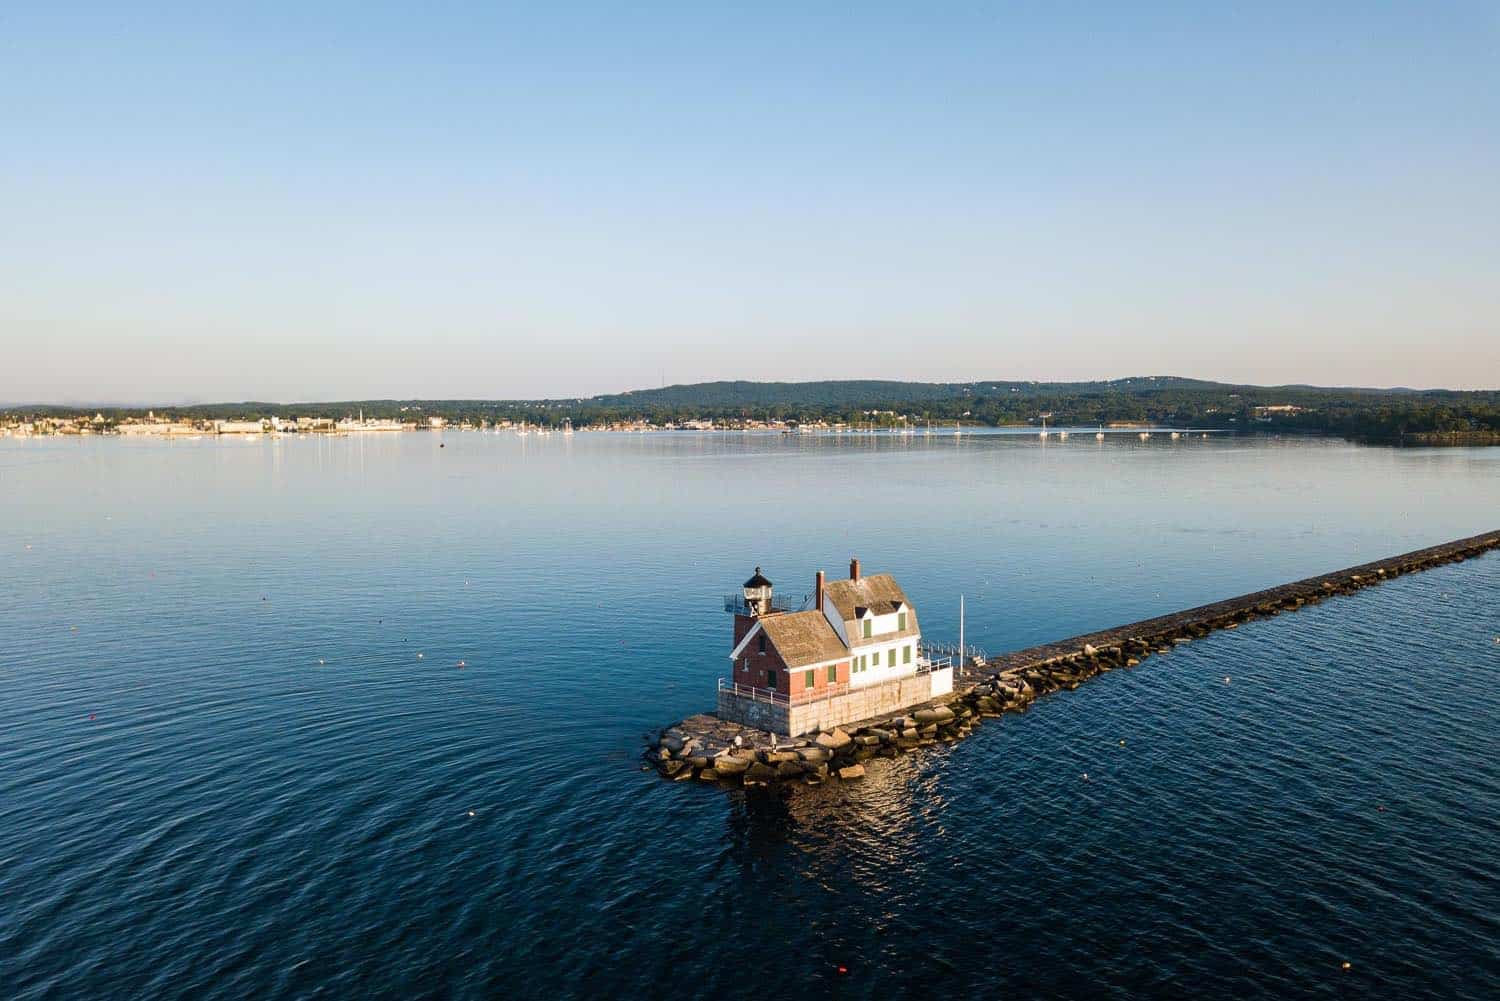 Aerial view of the Rockland Breakwater Lighthouse at the end of a pier, with calm waters and a distant shoreline under a clear sky.